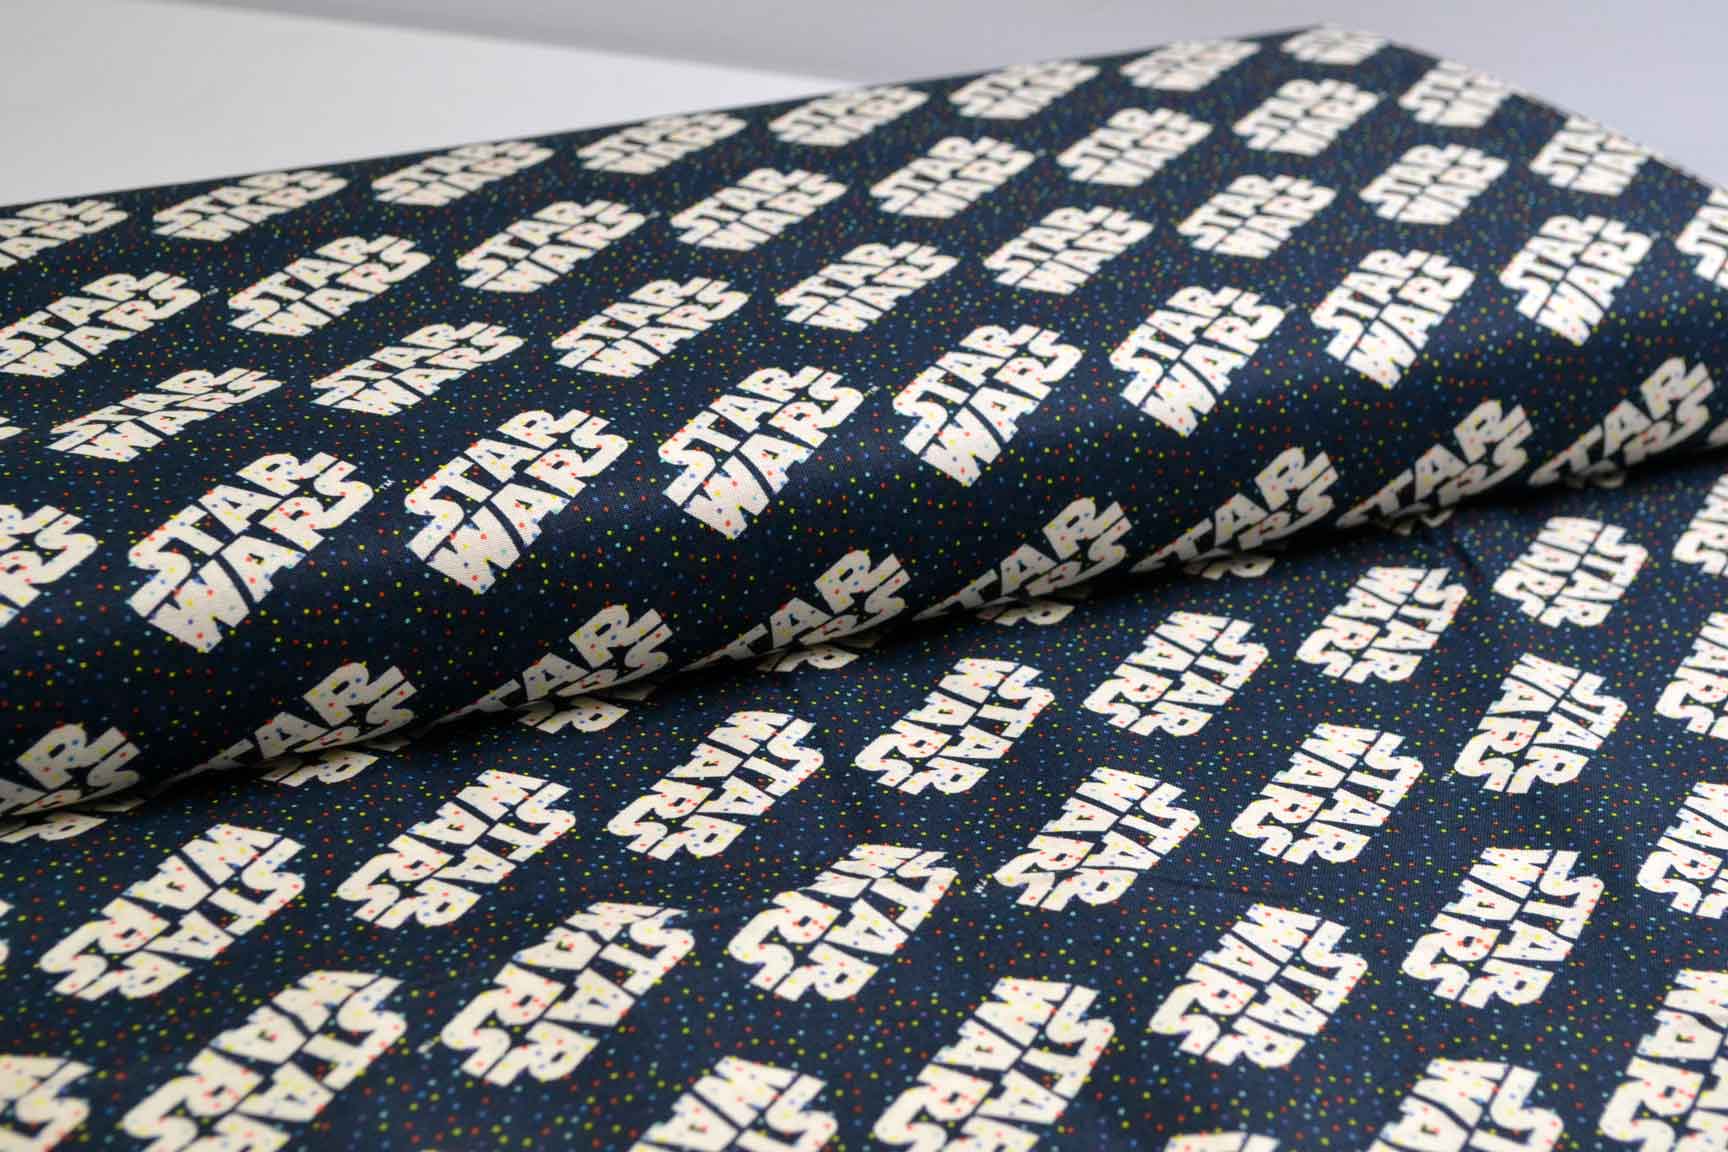 Star Wars Logo and Tiny Dots, Craft Cotton Co